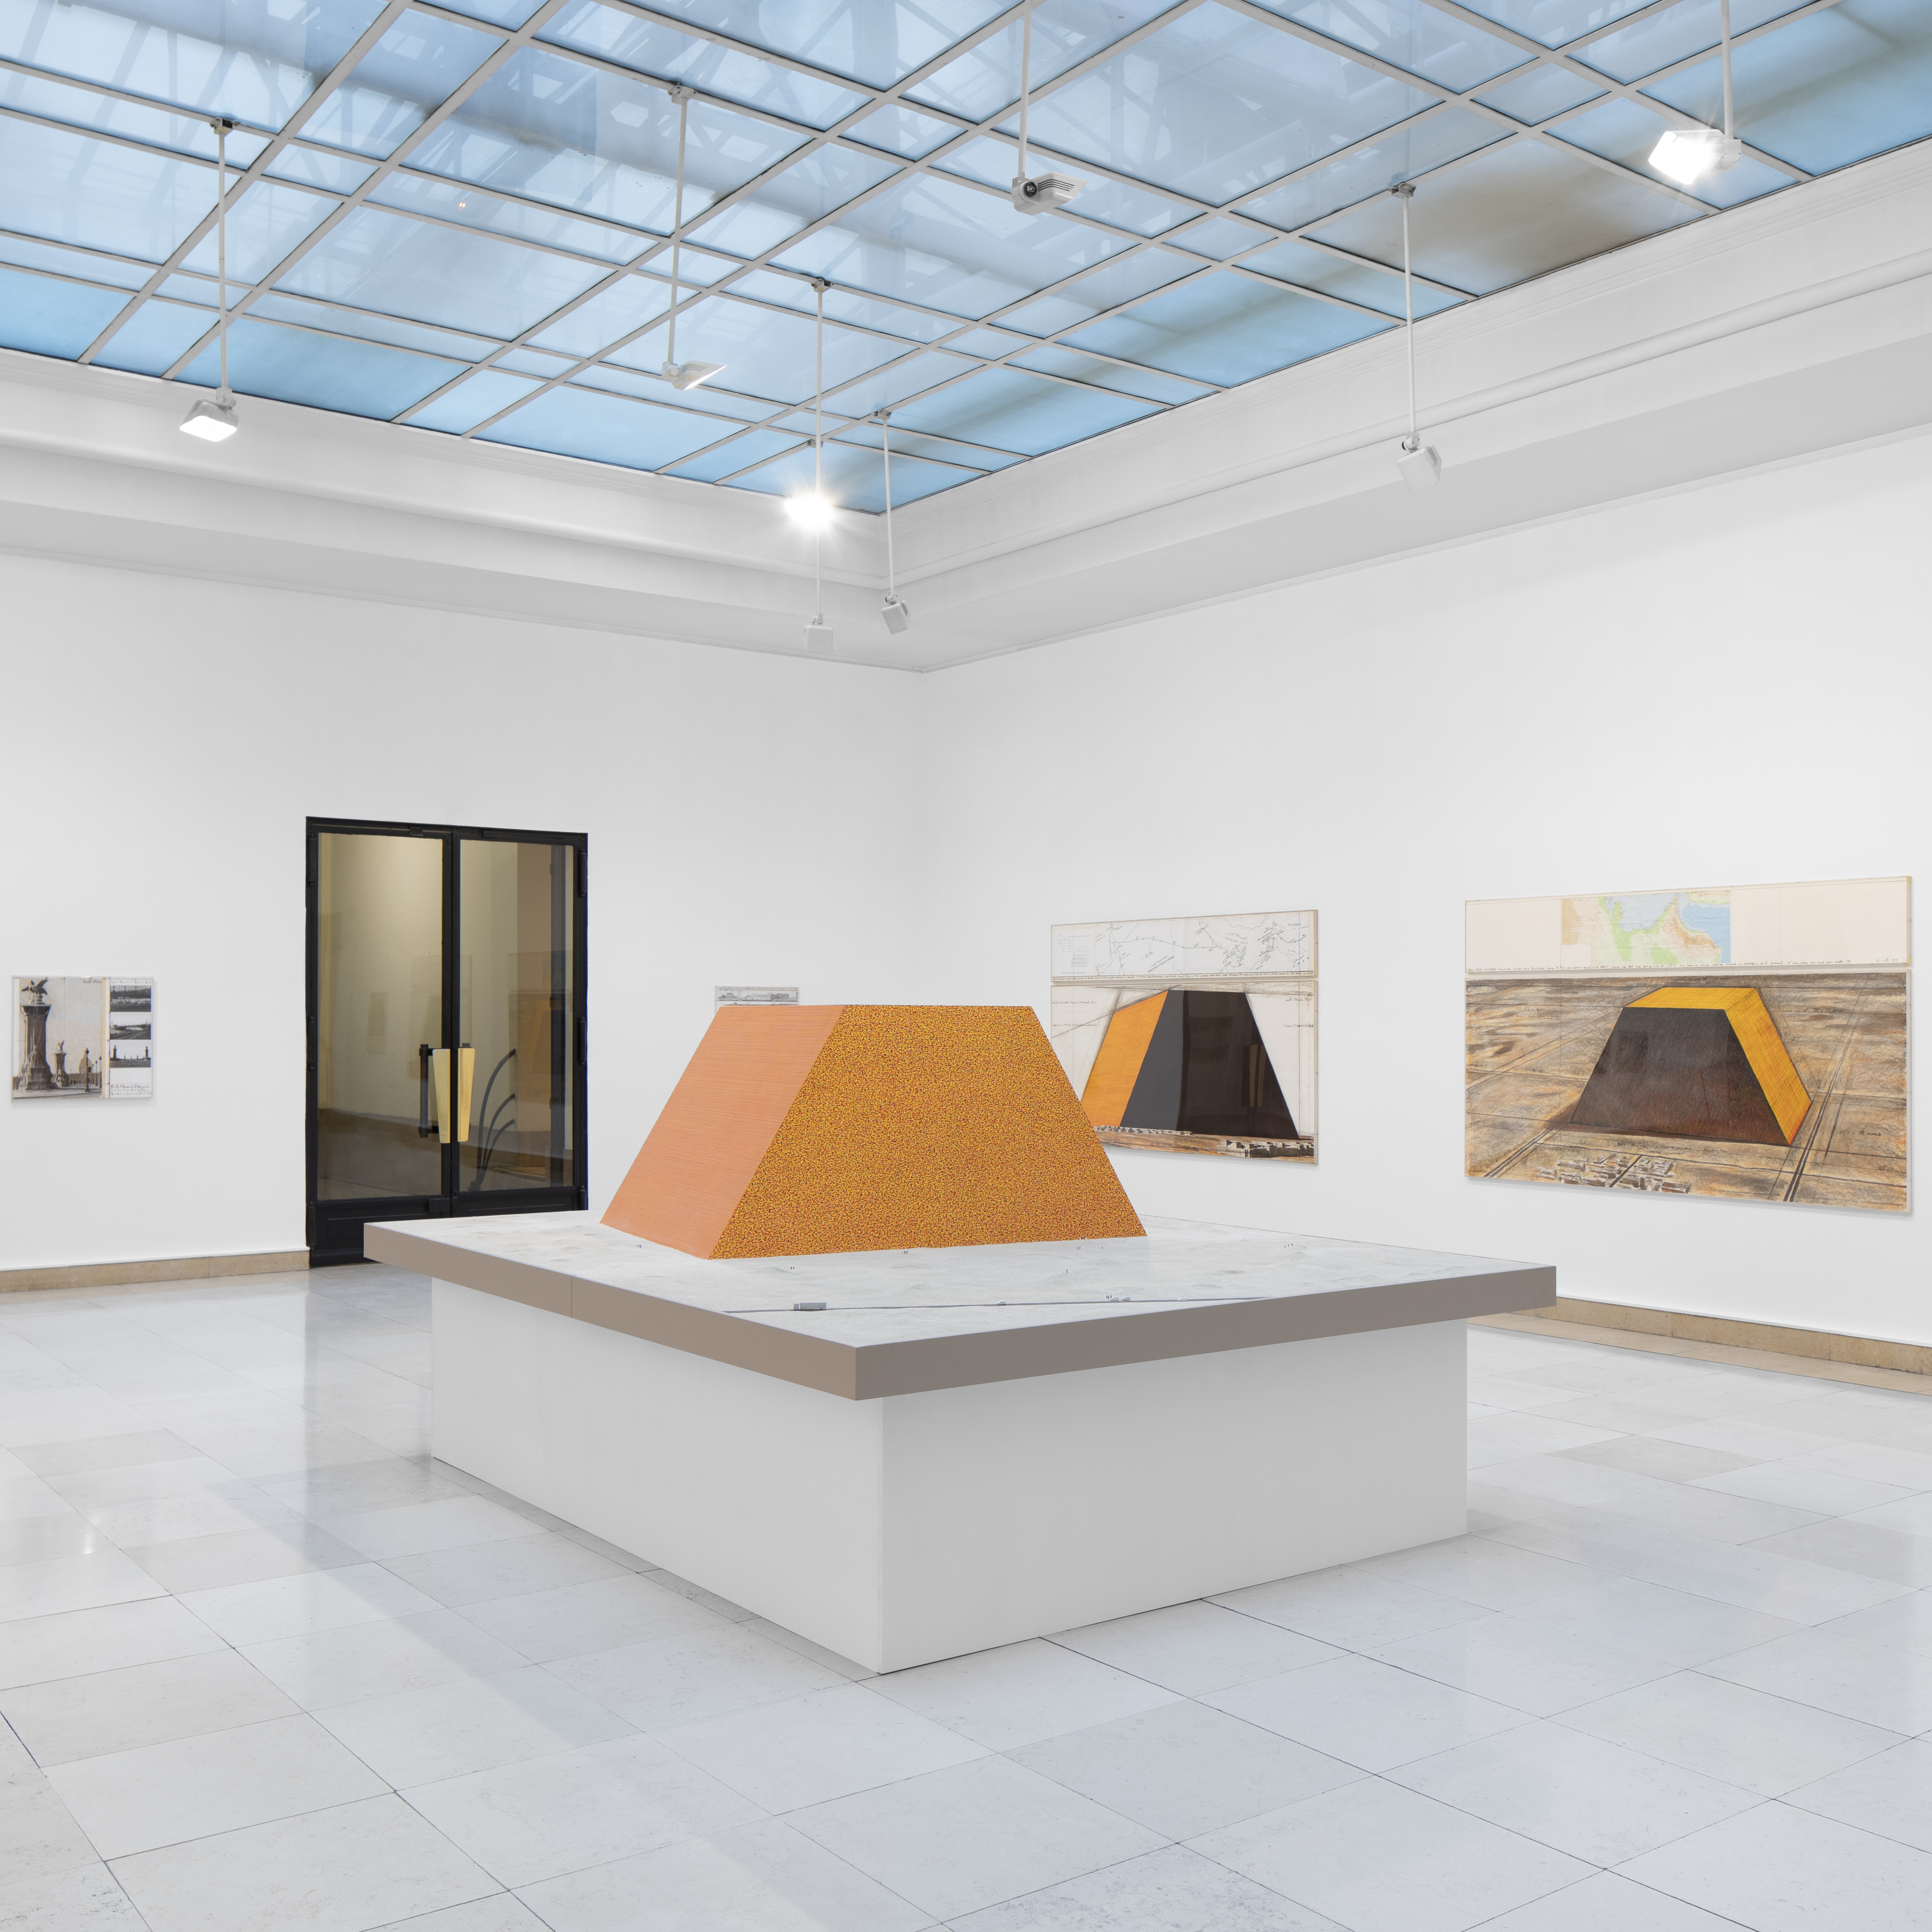 Christo: Early Works & Unrealized Projects